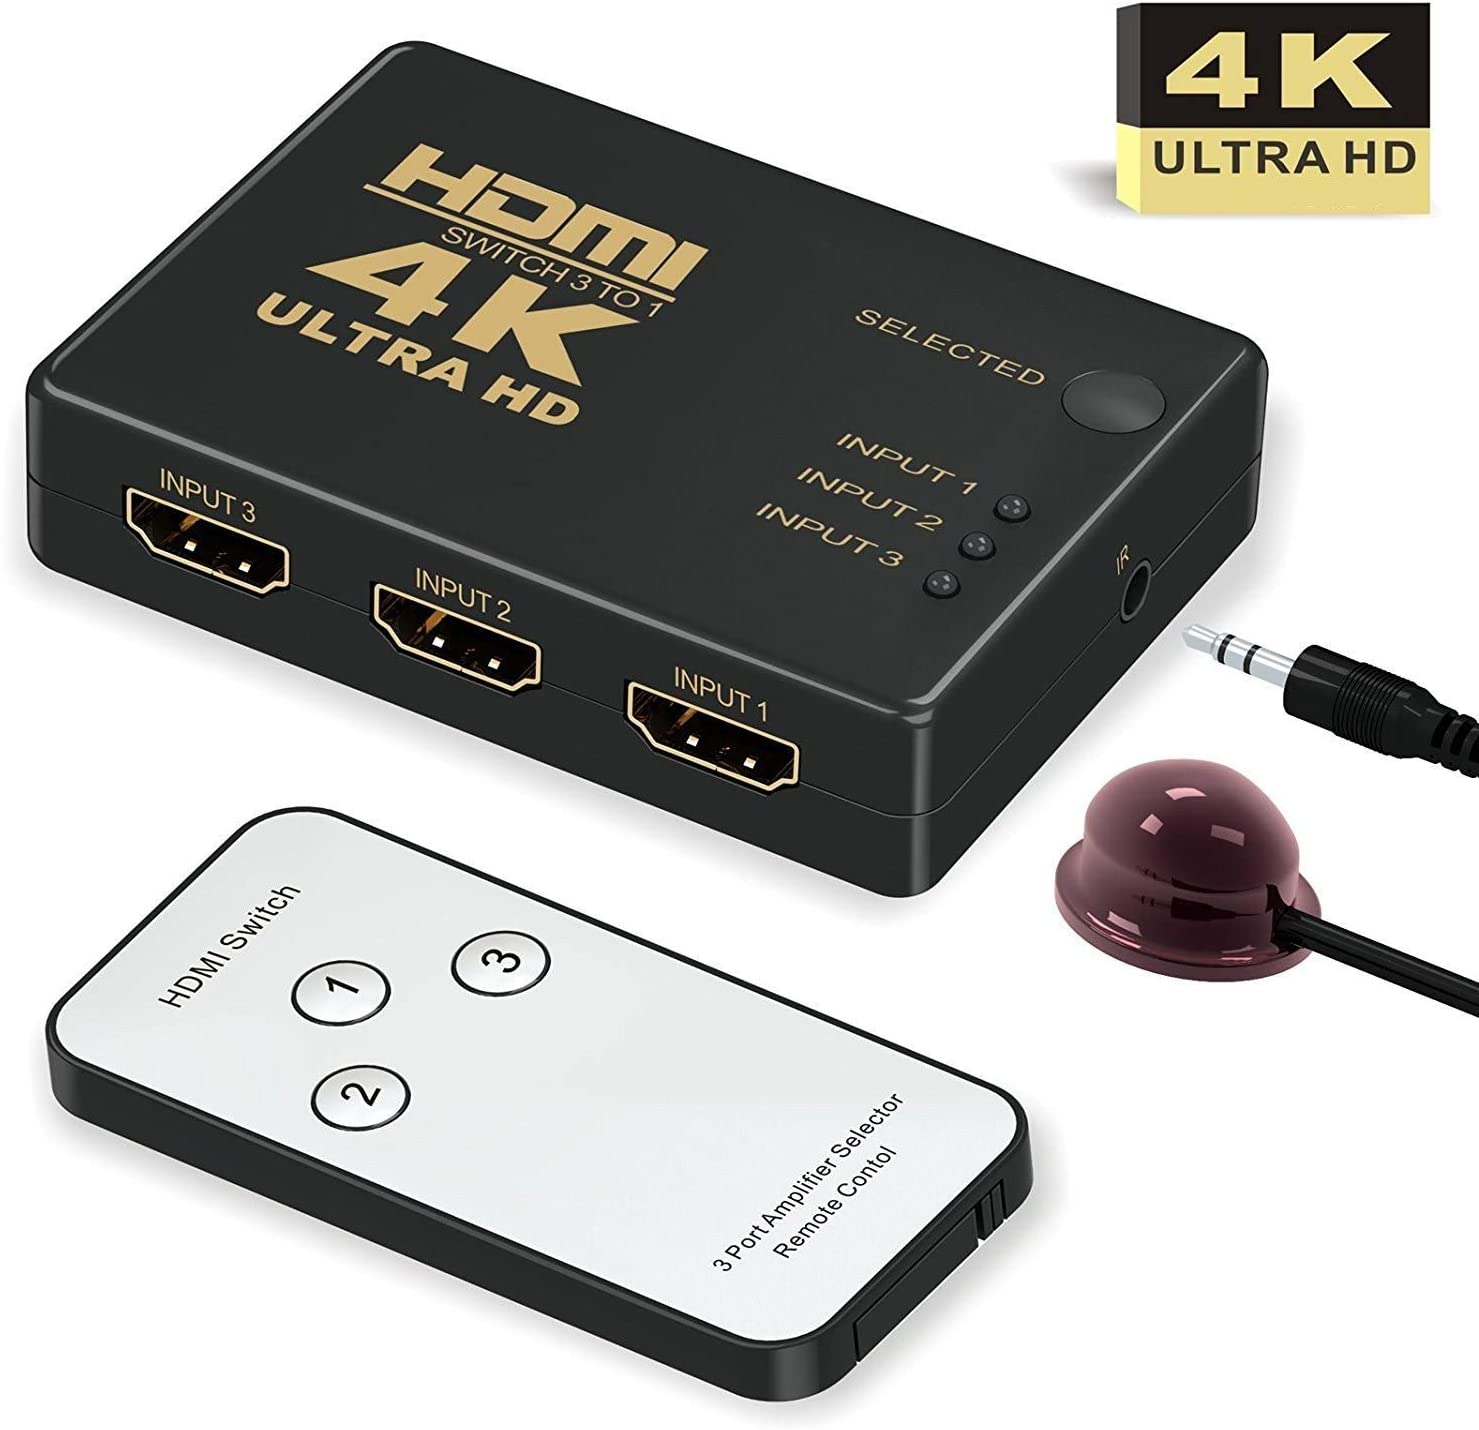  3-Port HDMI Switcher Supports 4K with IR Remote